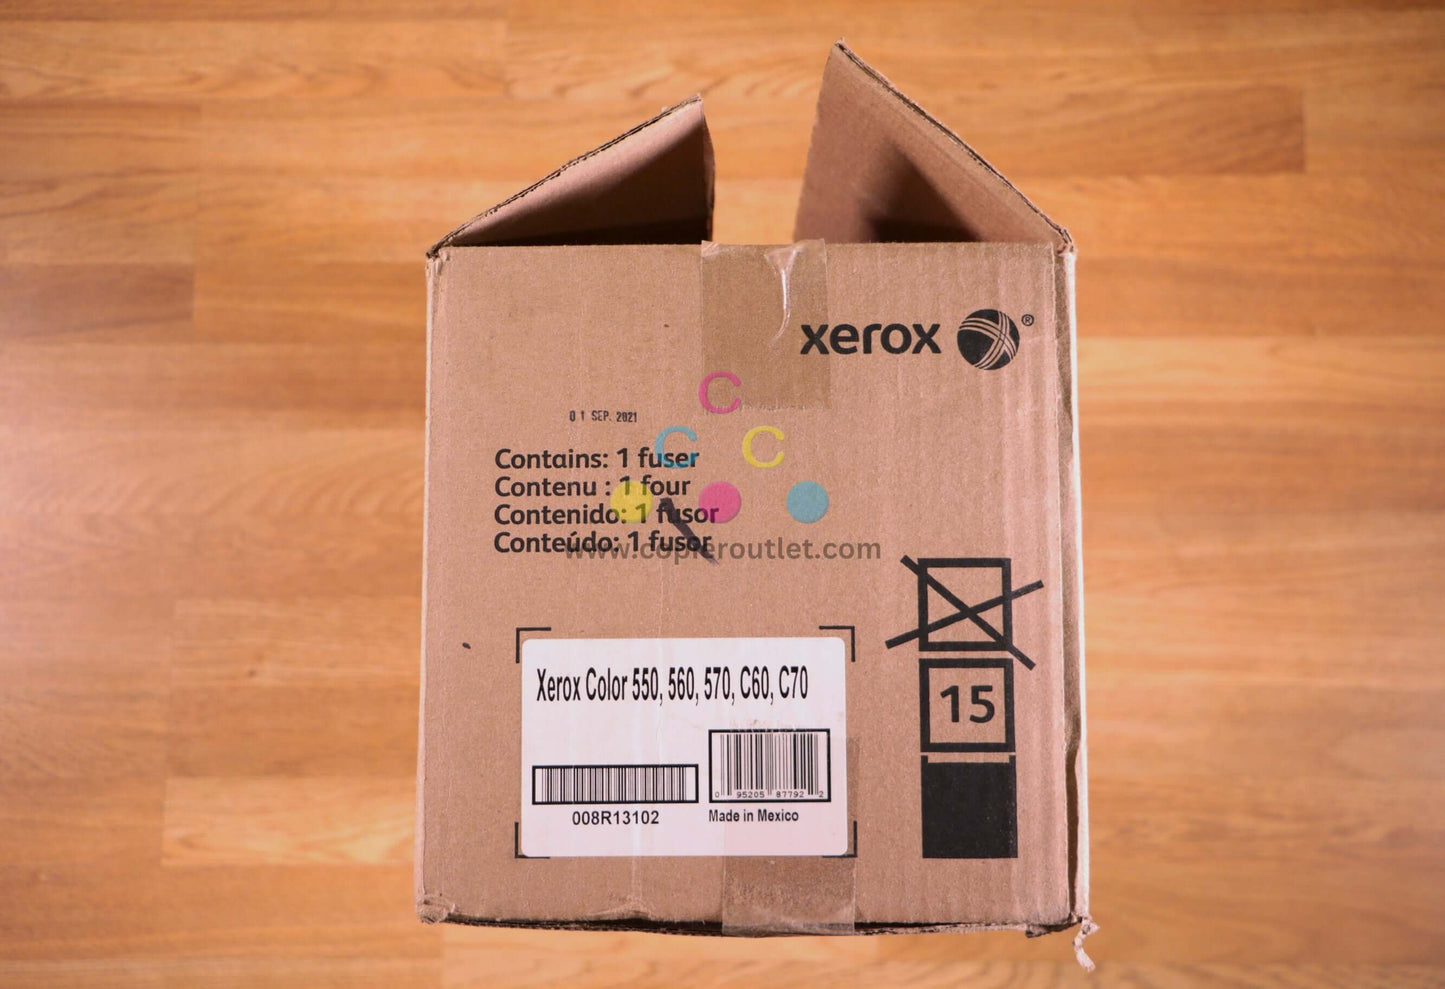 Open Genuine Xerox Fuser 008R13102 For Color 550,560,570,C60,C70 Same Day Ship!! - copier-clearance-center